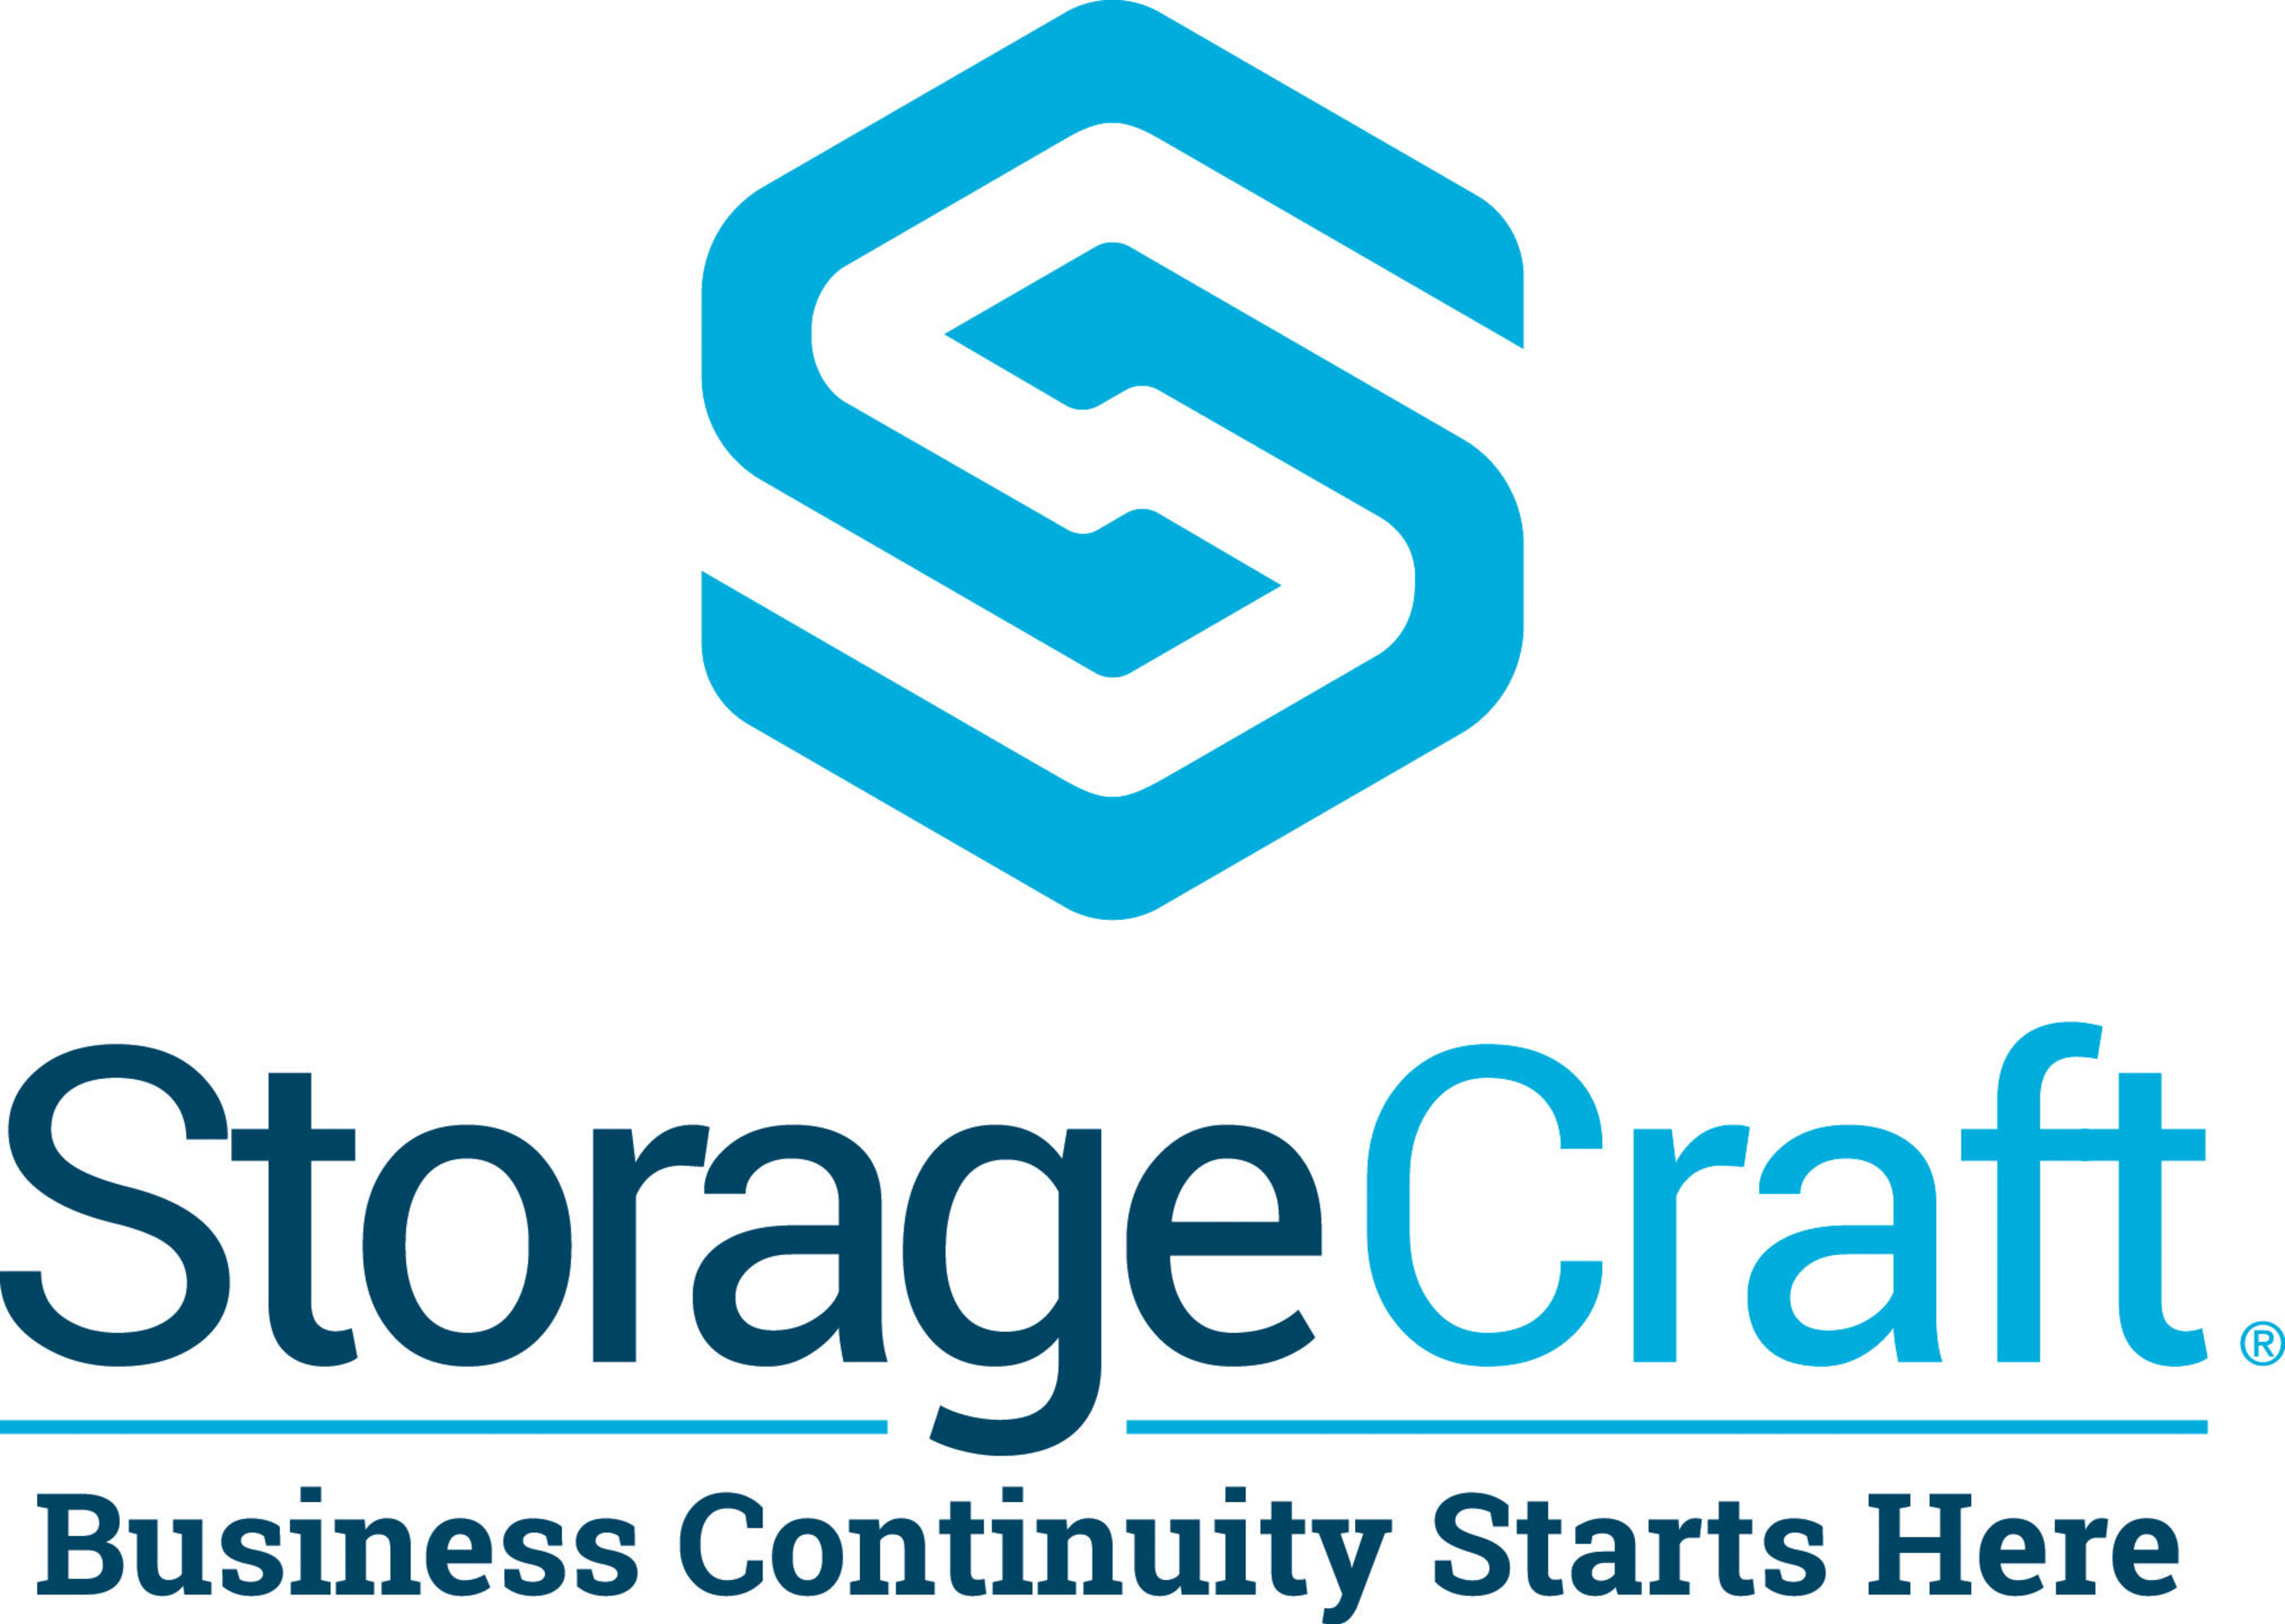 StorageCraft Technology Corporation provides best-in-class backup, disaster recovery, system migration, data protection, and cloud services solutions for servers, desktops and laptops. StorageCraft delivers software and services solutions that enable users to maintain business continuity during times of disaster, computer outages, or other unforeseen events by reducing downtime, improving security and stability for systems and data. For more information, visit www.storagecraft.com.